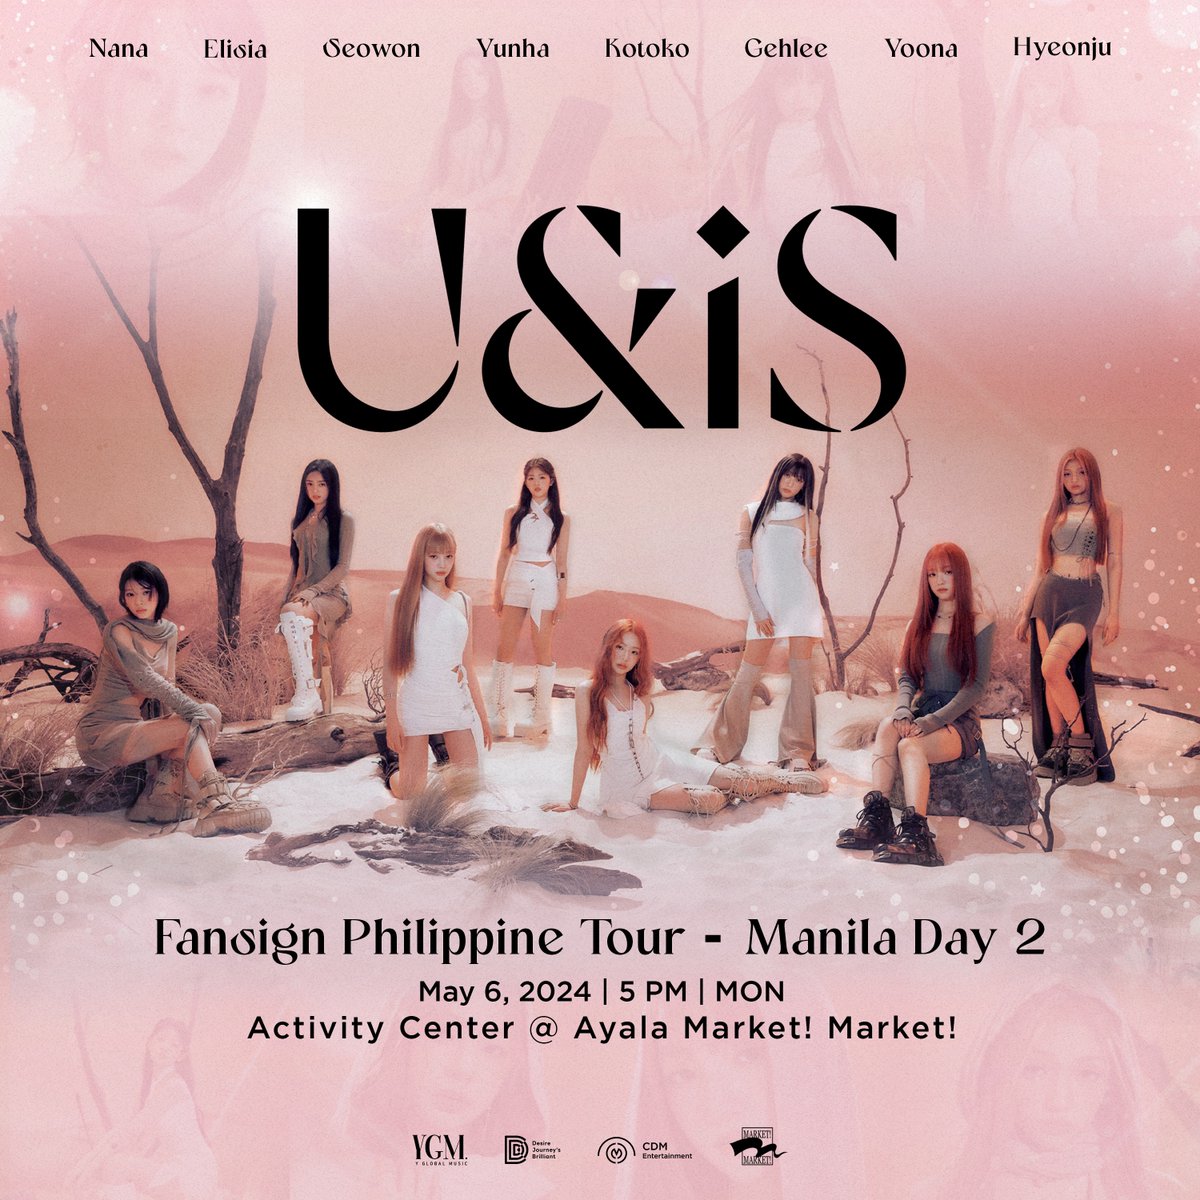 ICYMI: A third day has been added to UNIS' U&iS Fansign Philippine Tour in Manila! #UNISinMANILA_Day2 is happening on May 6, 5PM, at the Activity Center of Ayala Market! Market!

Get your WE UNIS albums via cdmentertainment.ph to join UNIS' fansign events on May 4, 5, and 6!…